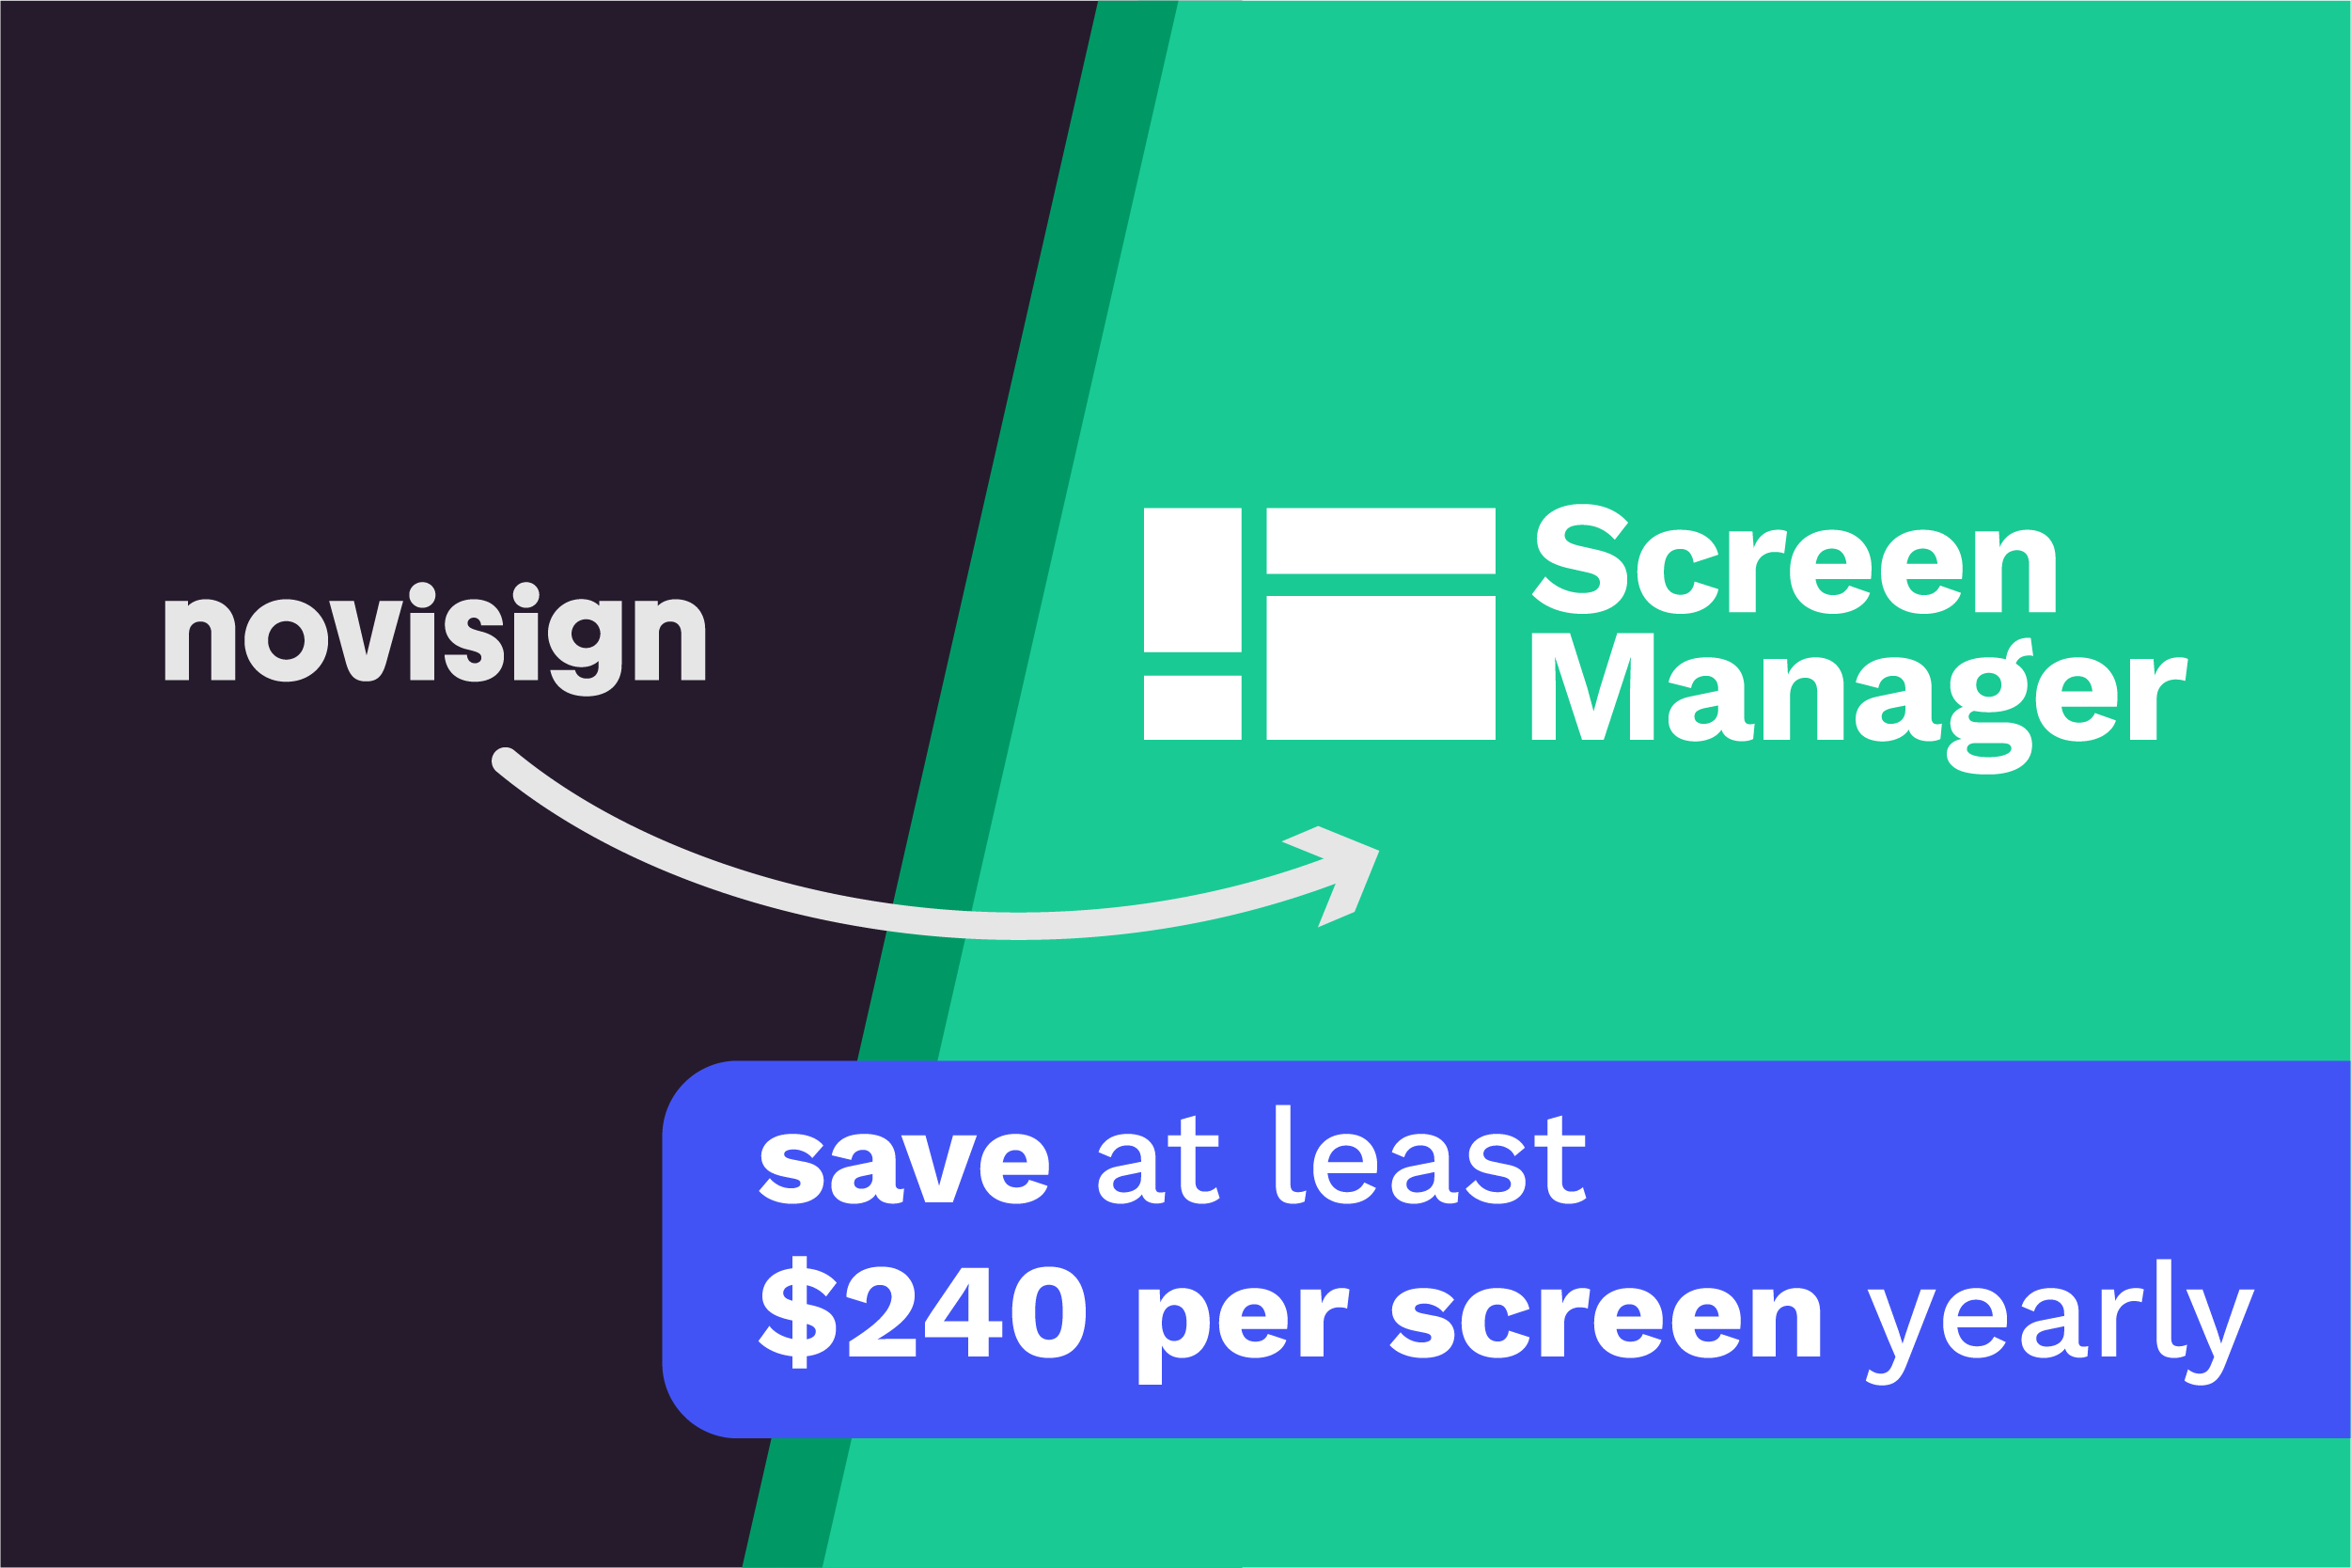 switch from novisign to screen manager today